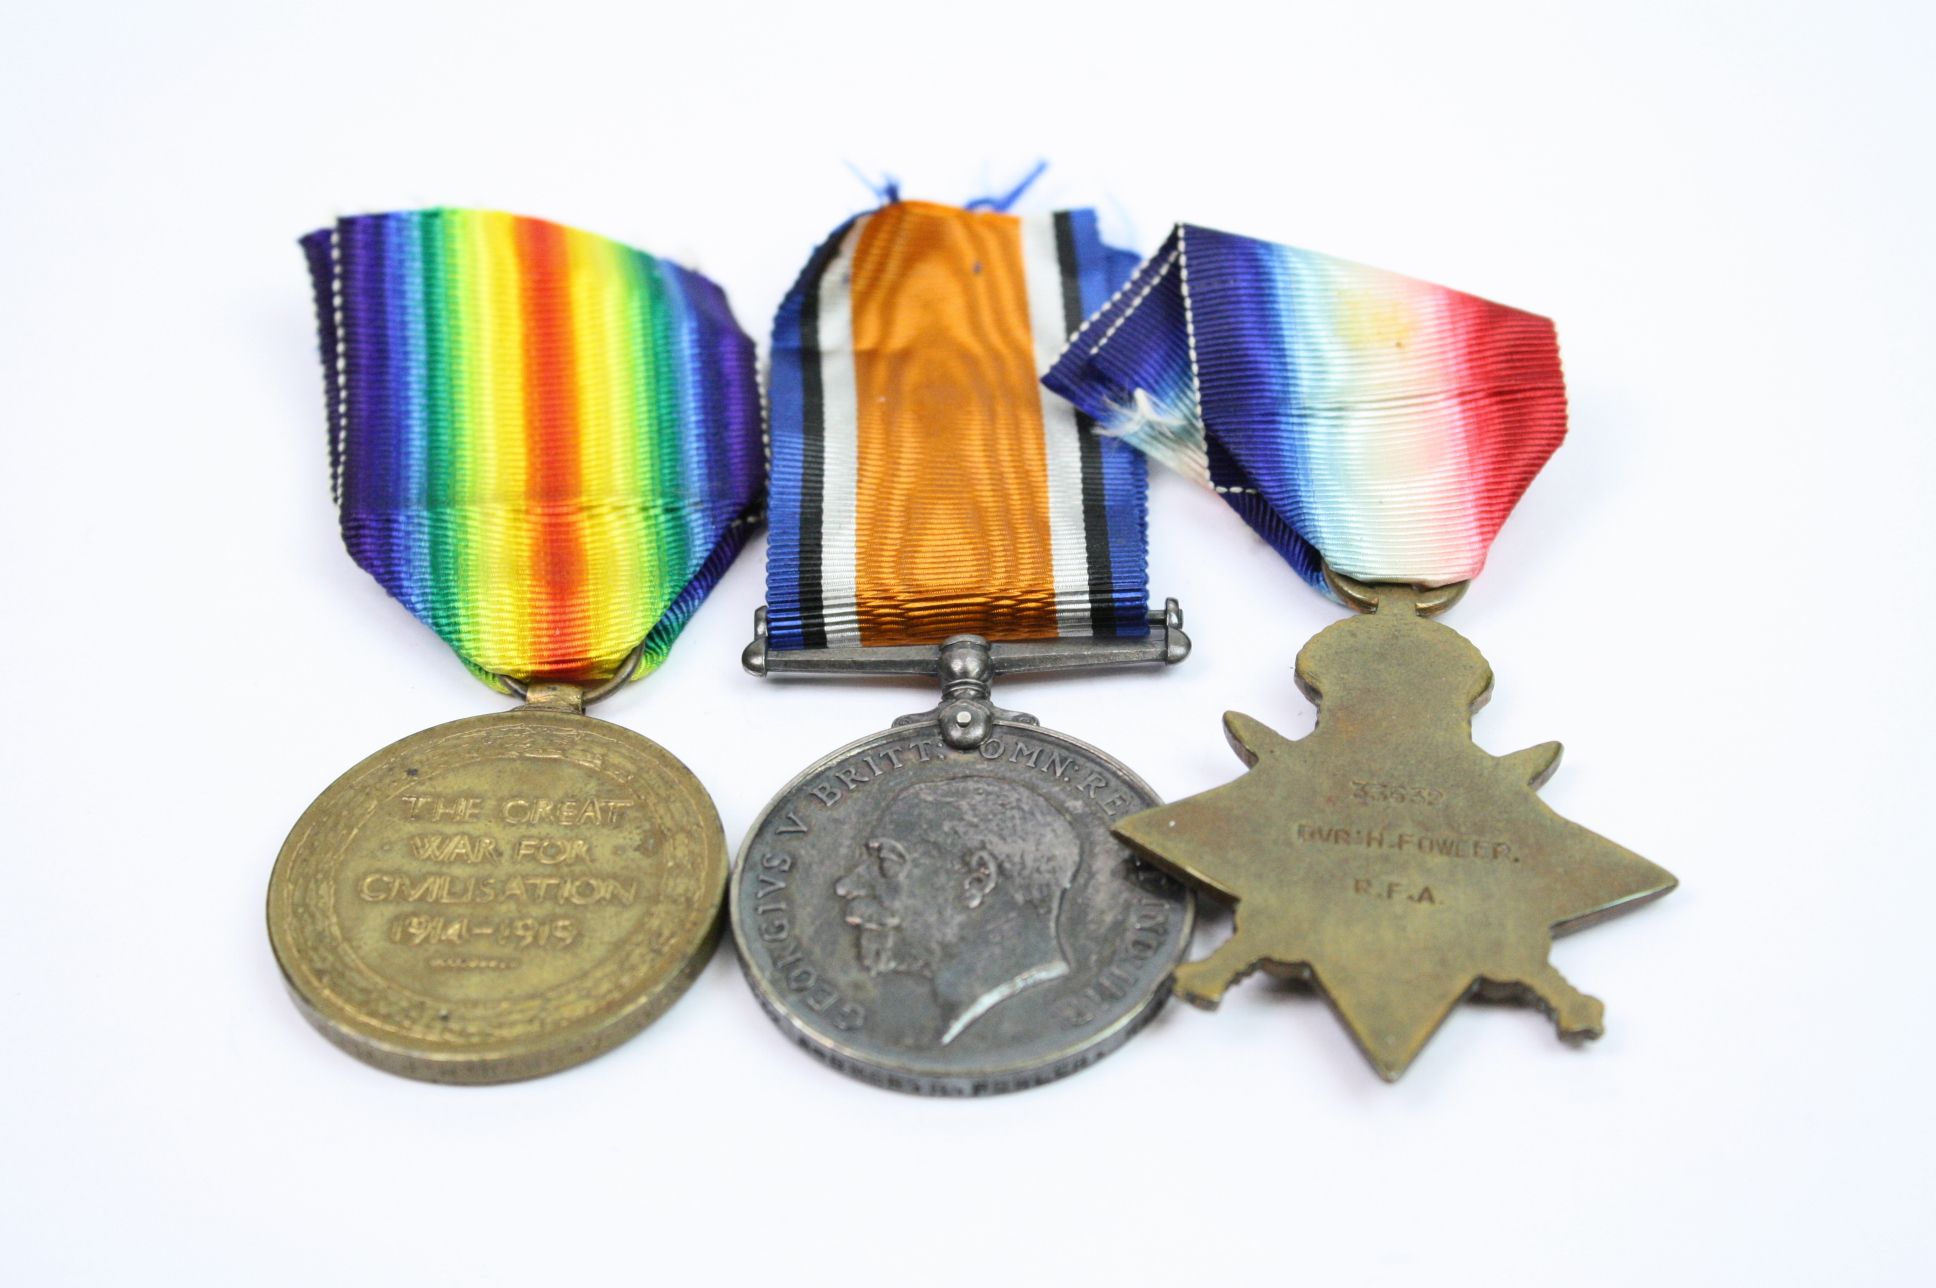 A Full Size British World War One Medal Trio To Include The British War Medal, The Victory Medal And - Image 9 of 13